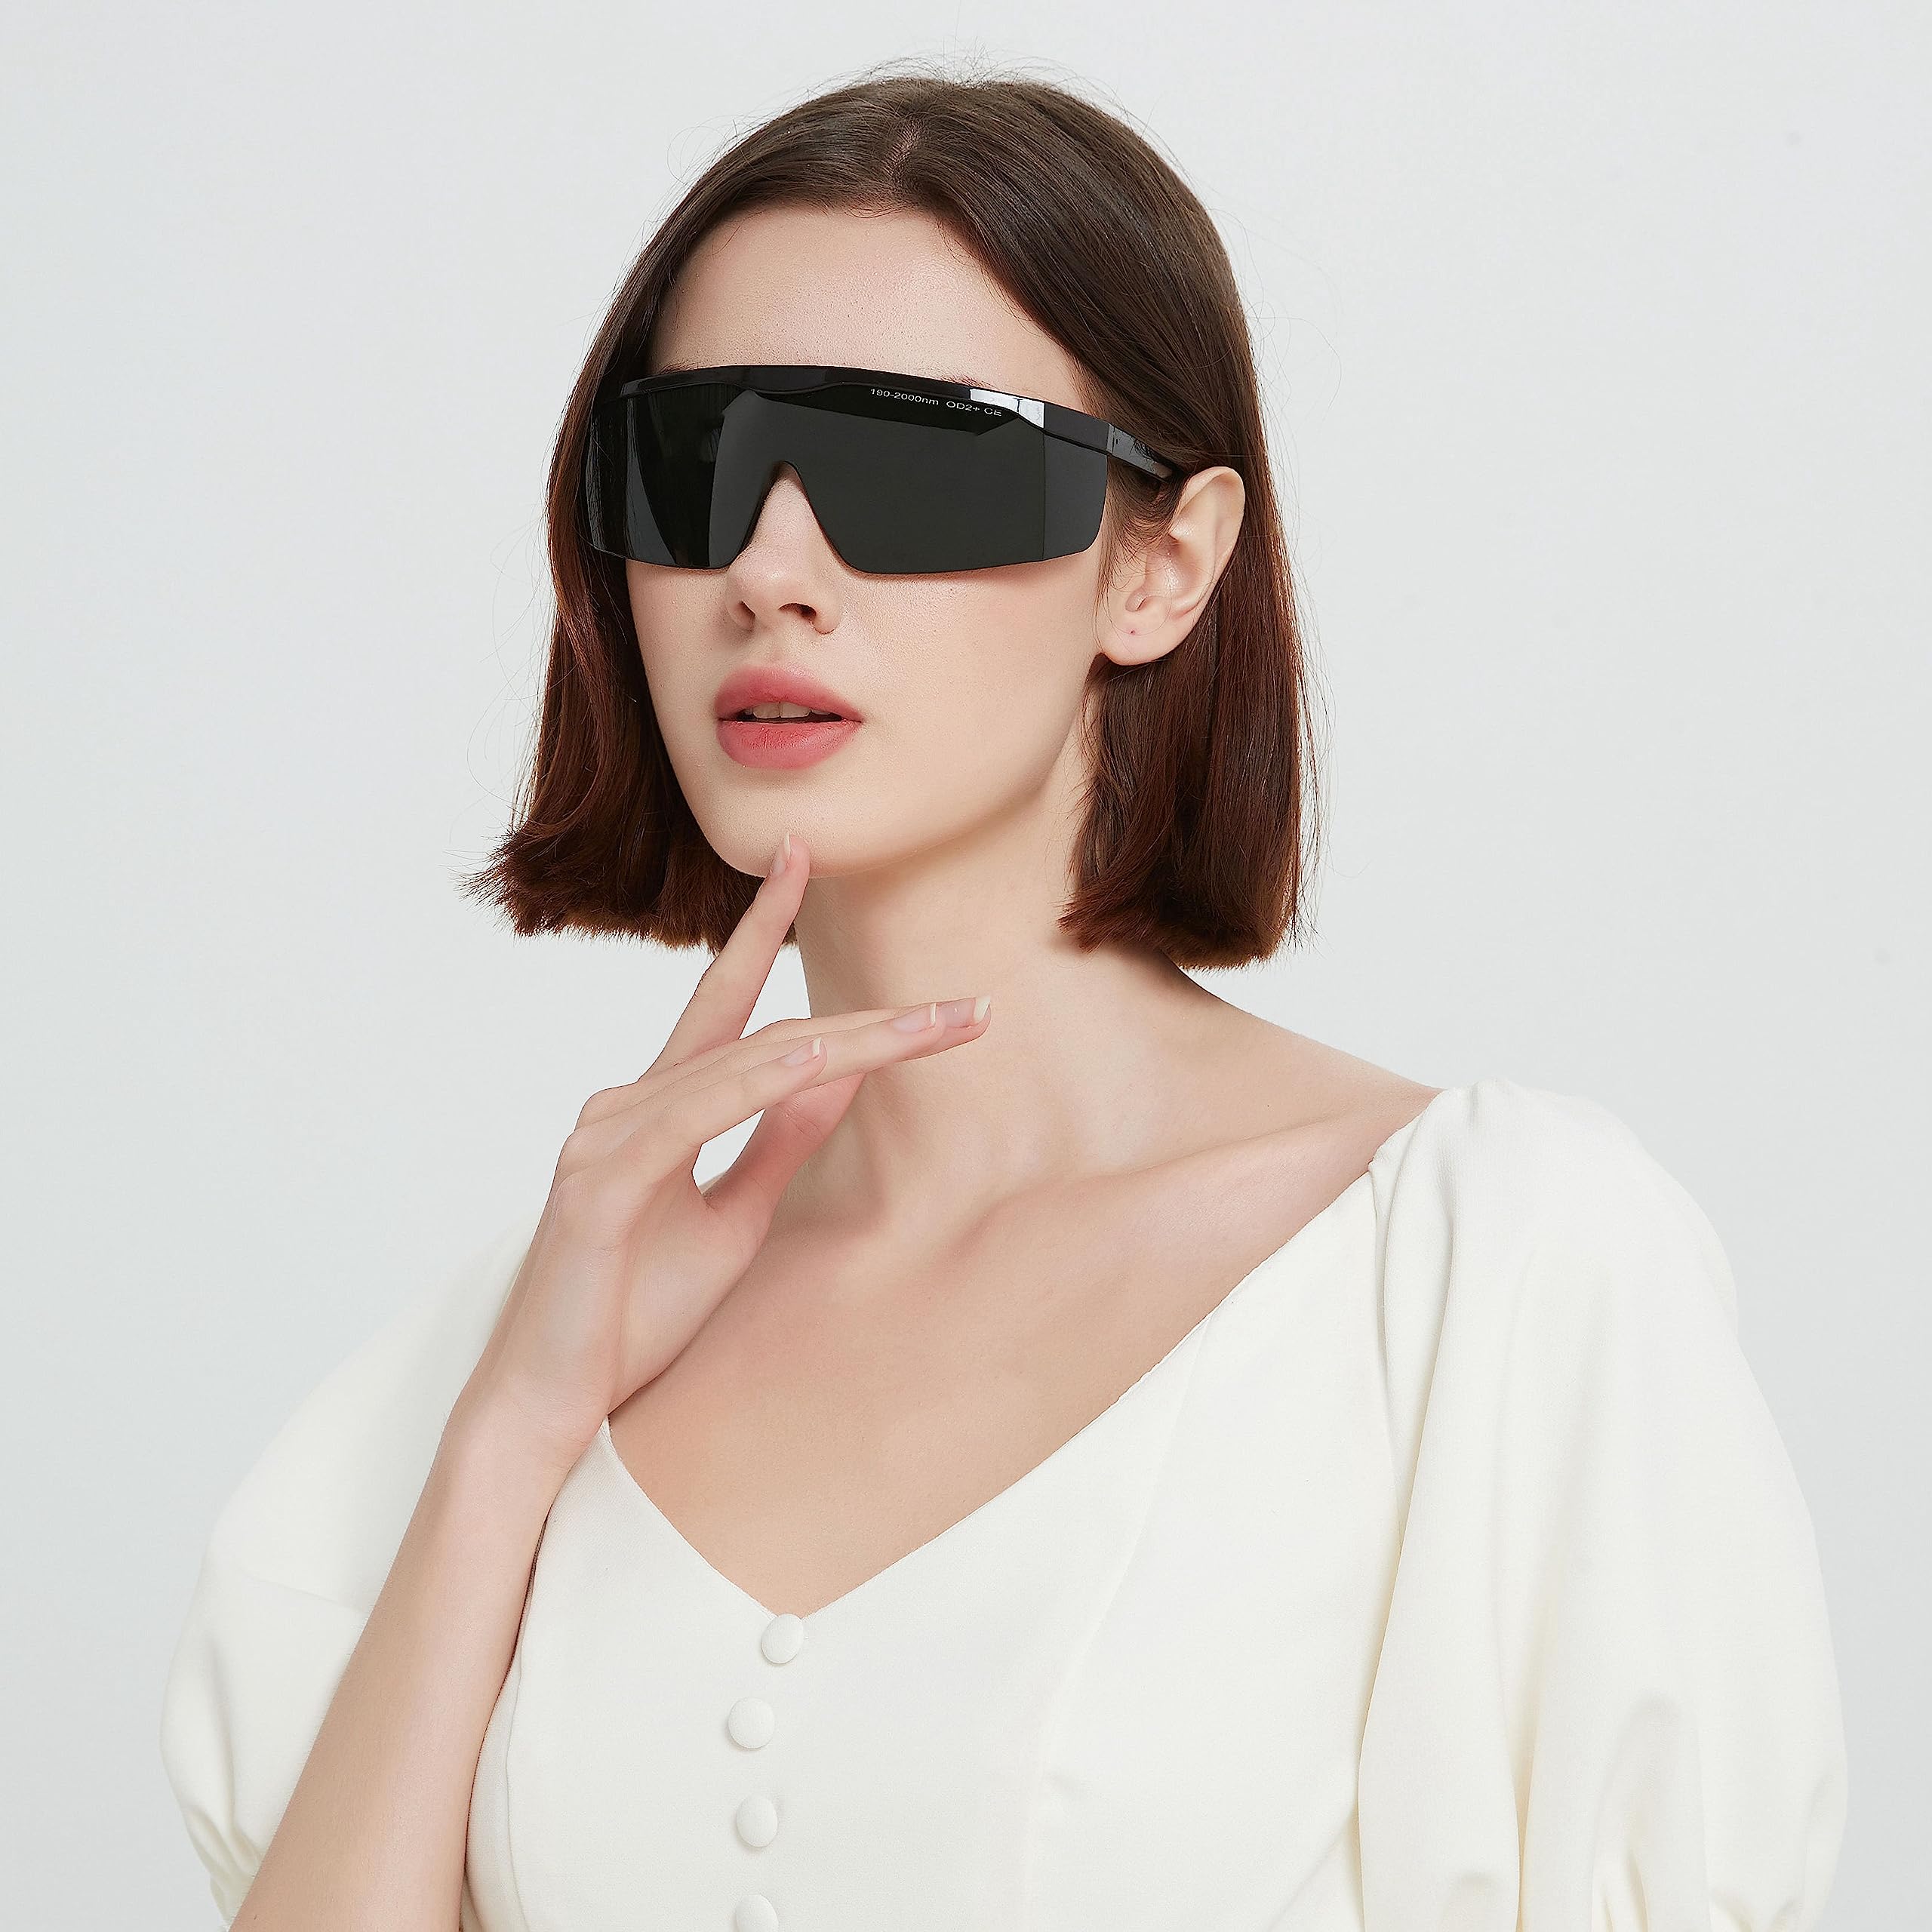 Alsenor IPL 190nm-2000nm Laser Safety Glasses Goggles For Laser Cosmetology Operator Eye Protection And Laser Hair Removal Treatment